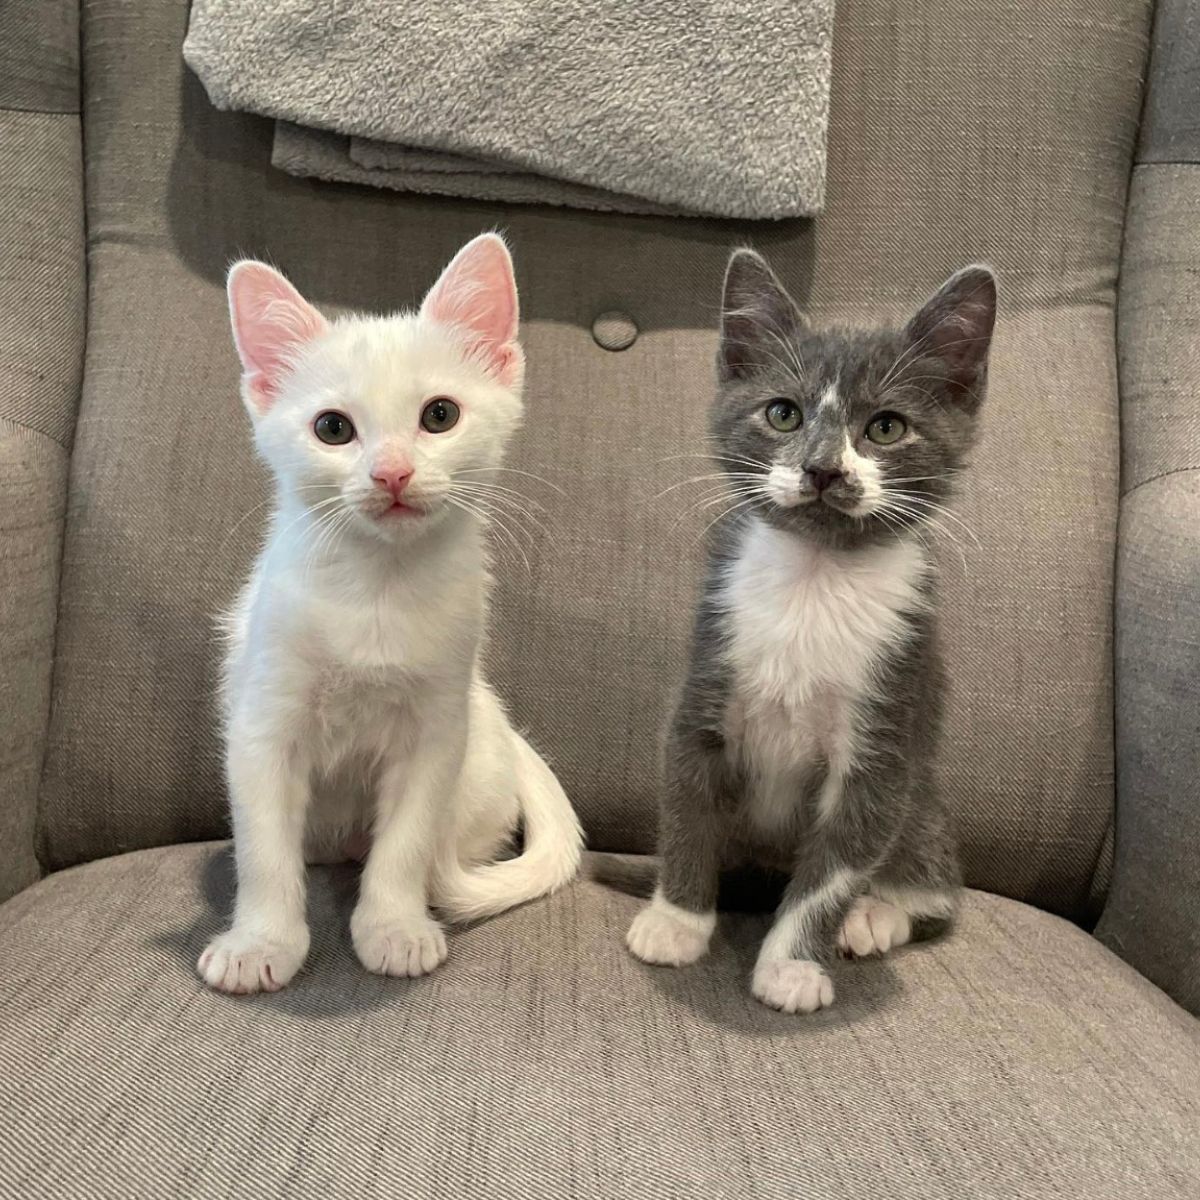 photo of two kittens sitting